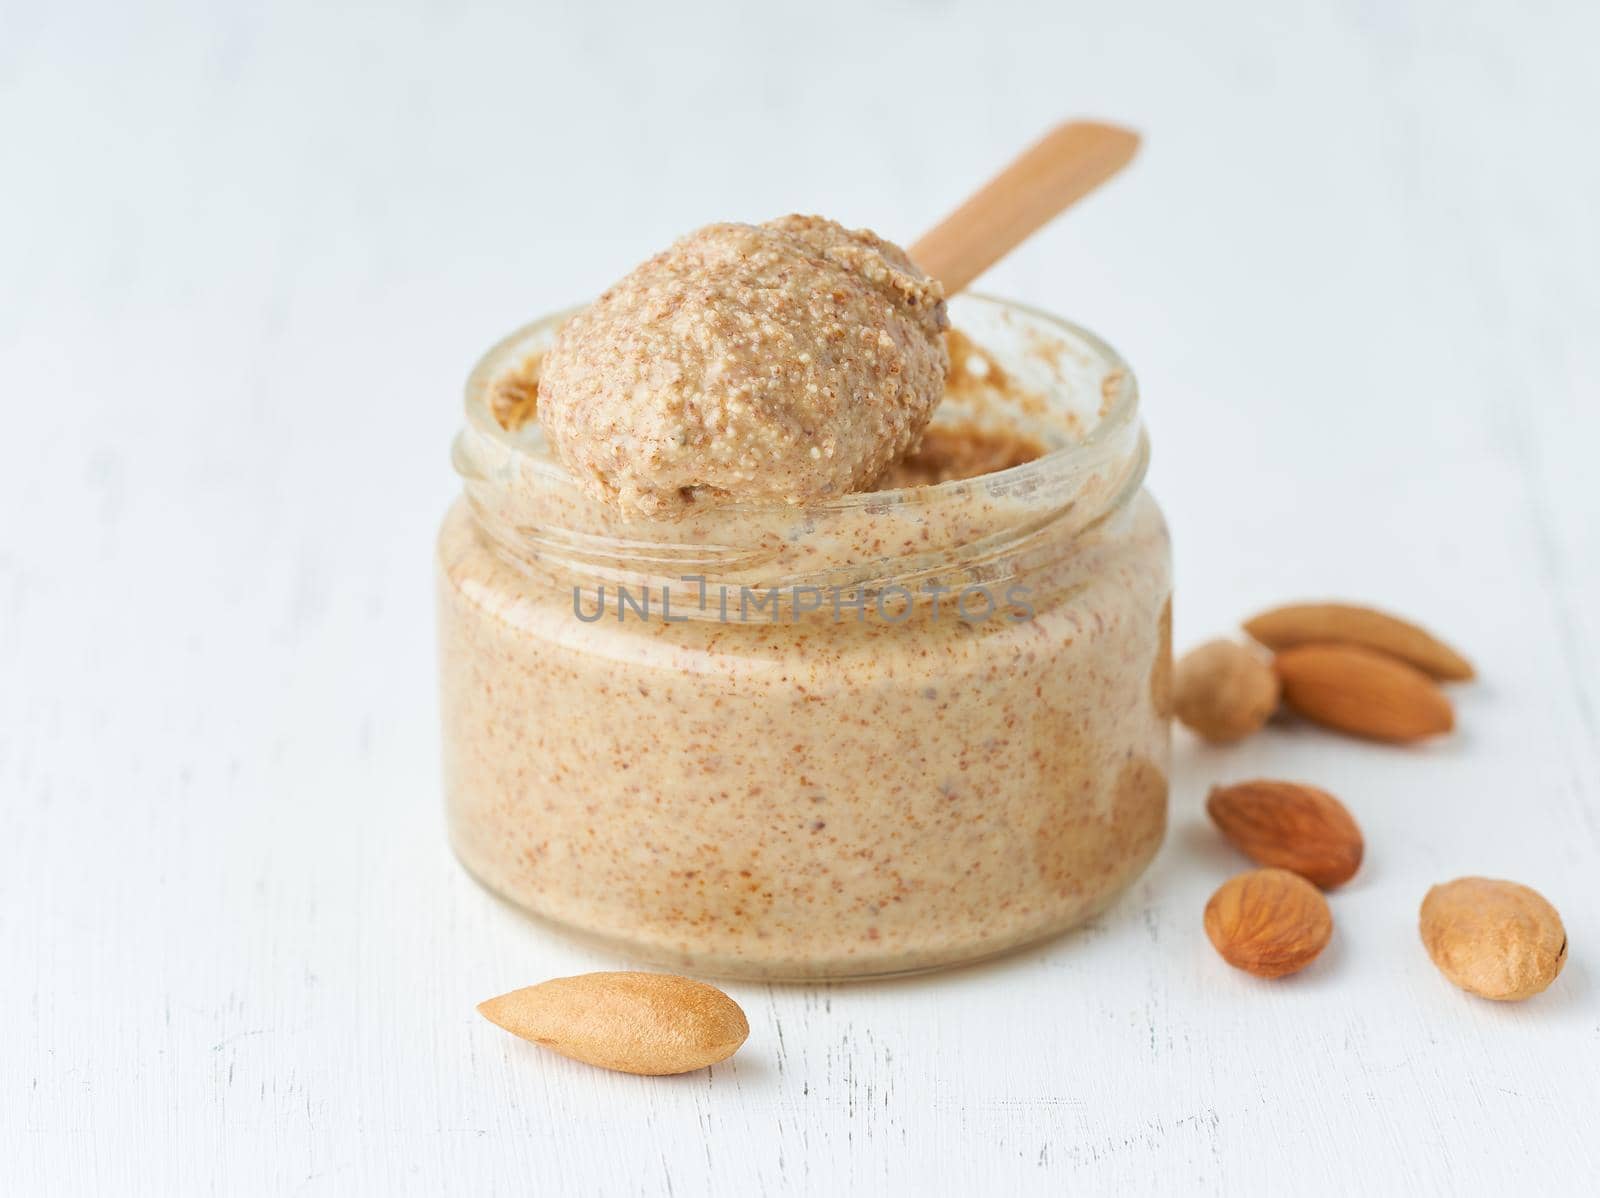 Almond butter, raw food paste made from grinding almonds into nut butter by NataBene